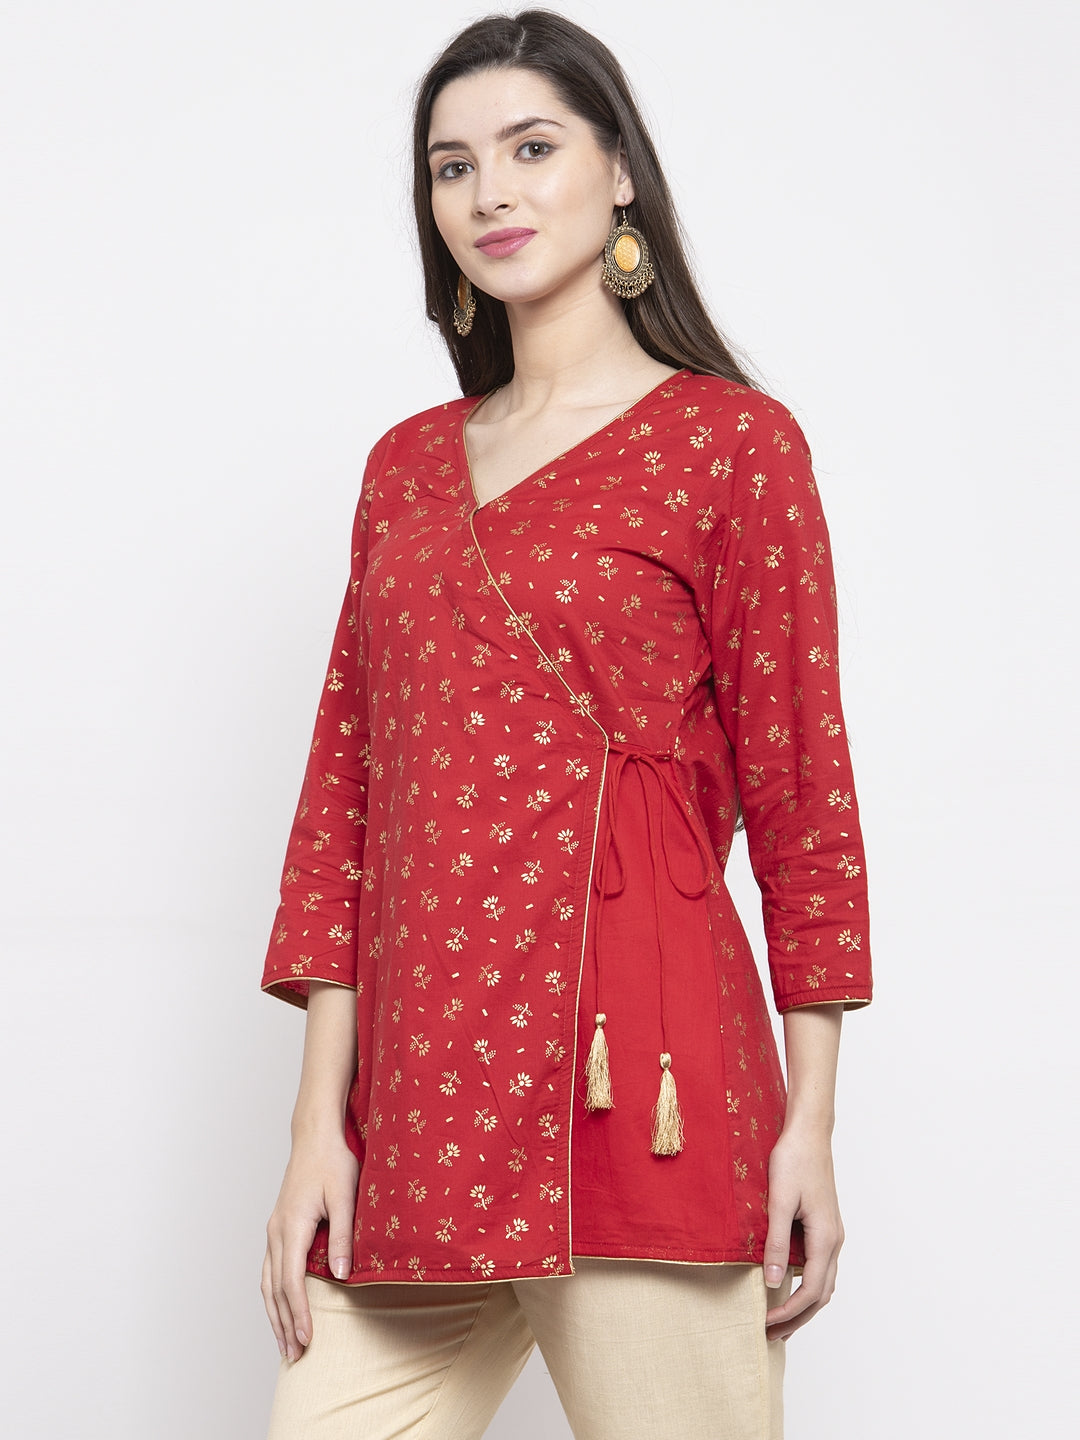 Bhama Couture Red Printed Ethnic Tunic